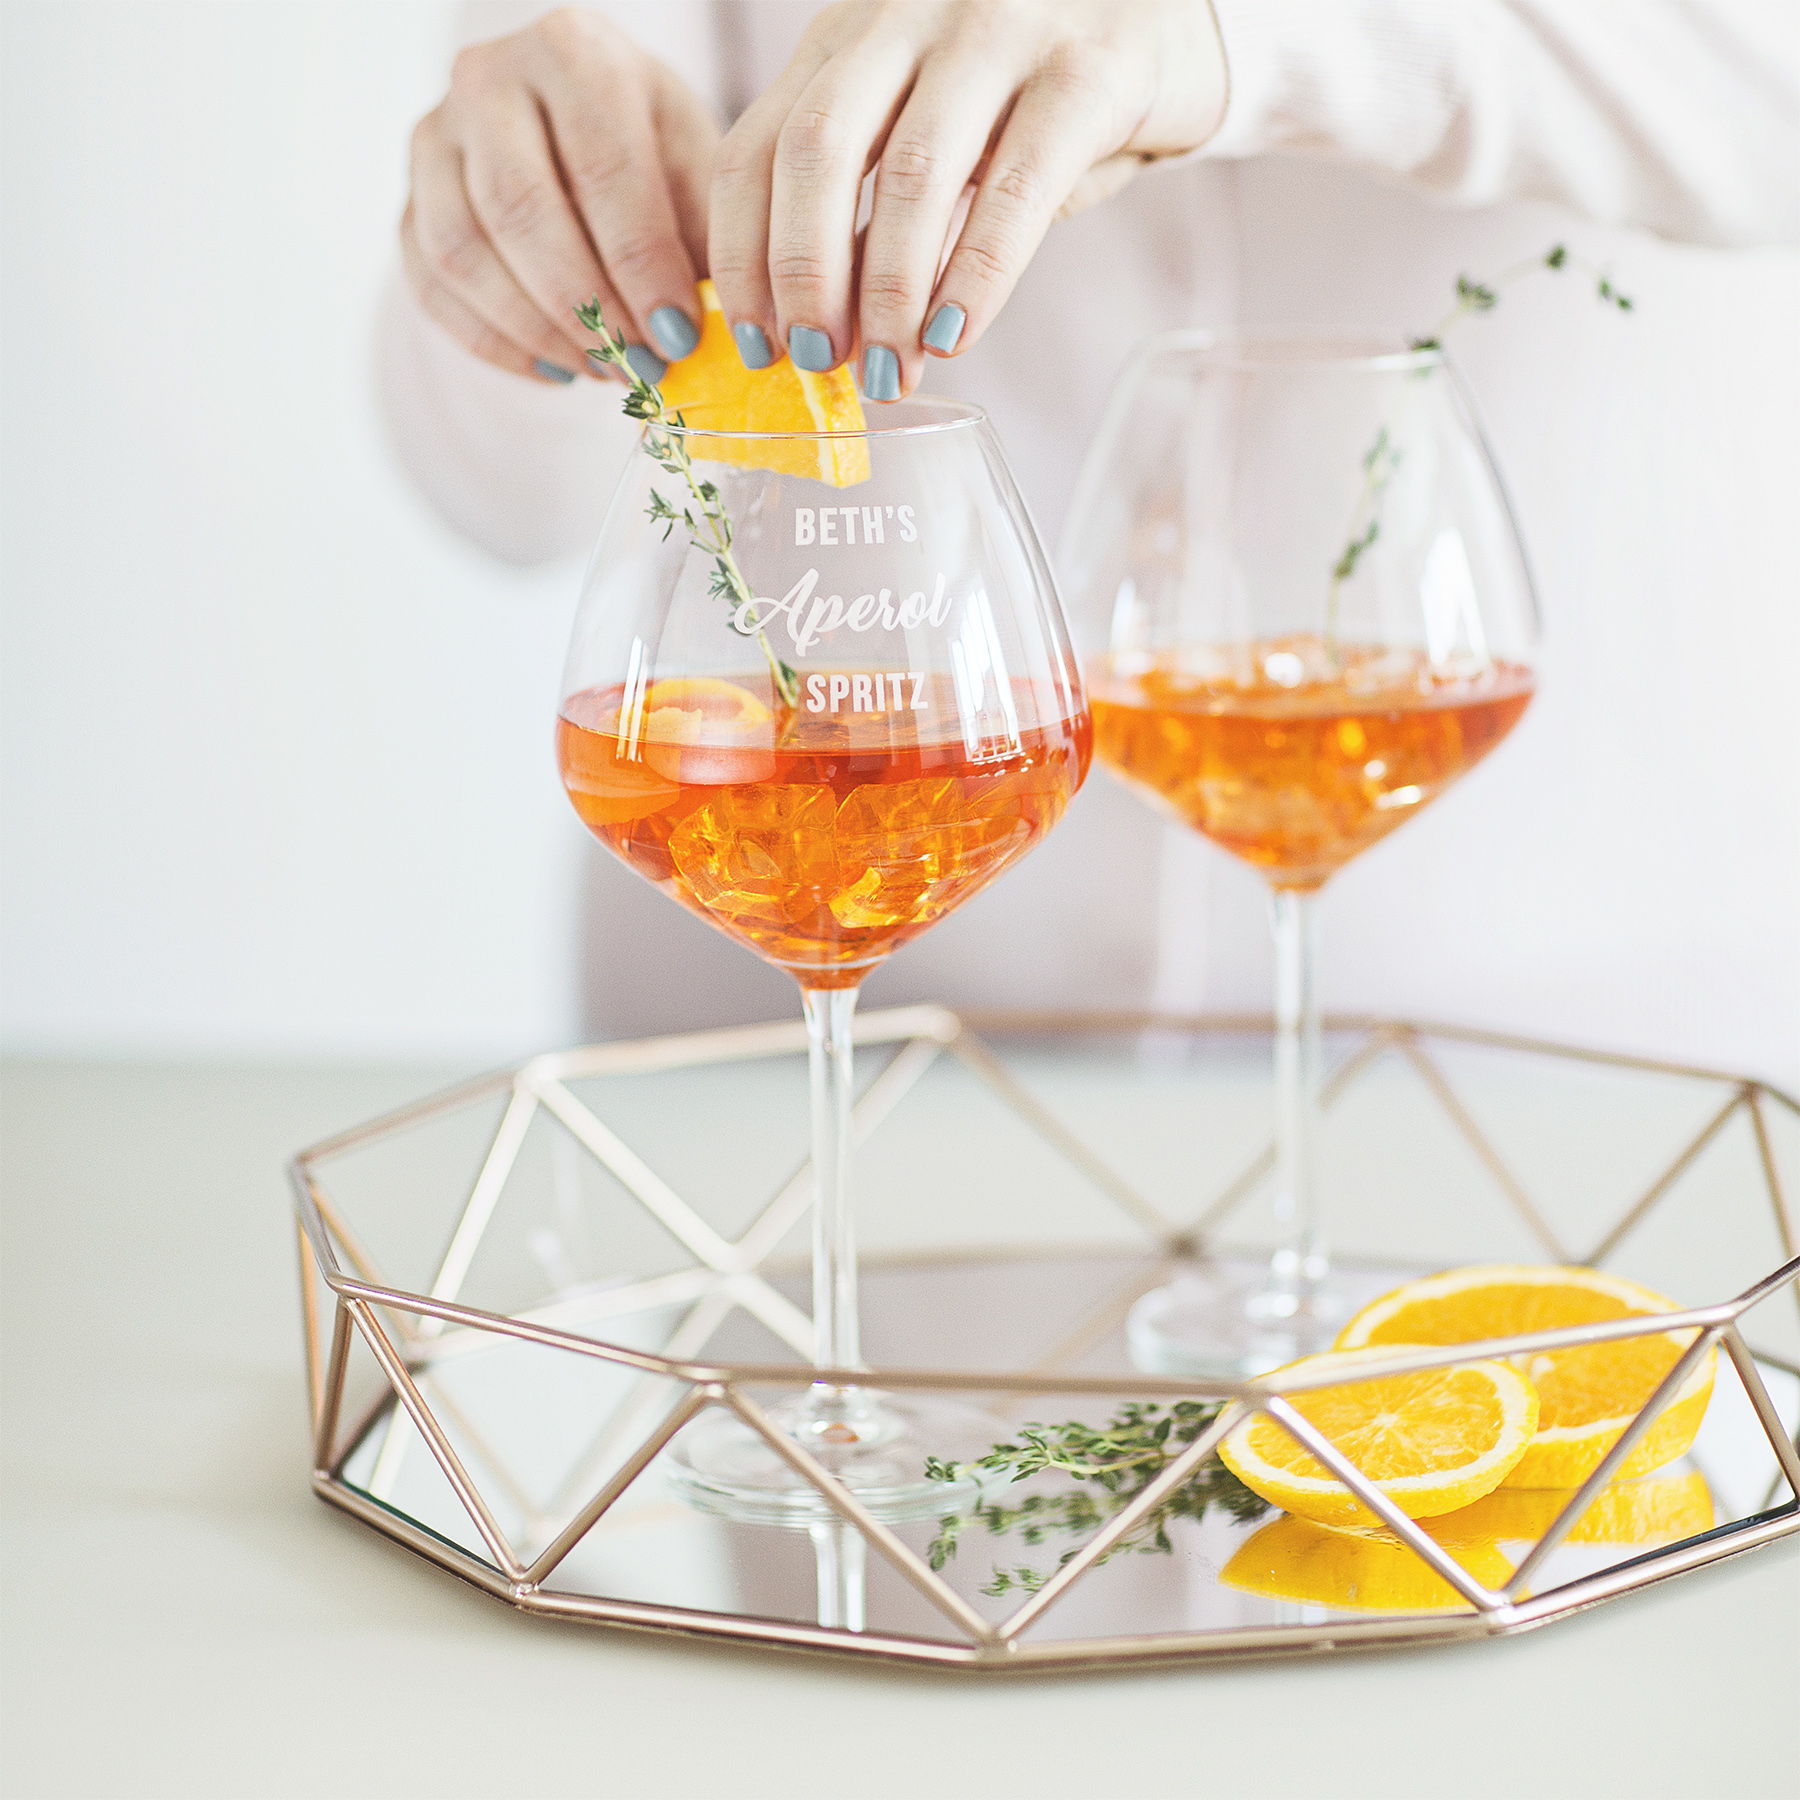 https://www.beckybroome.com/wp-content/uploads/2017/10/Personalised-Aperol-Spritz-Glass-Lifestyle.jpg